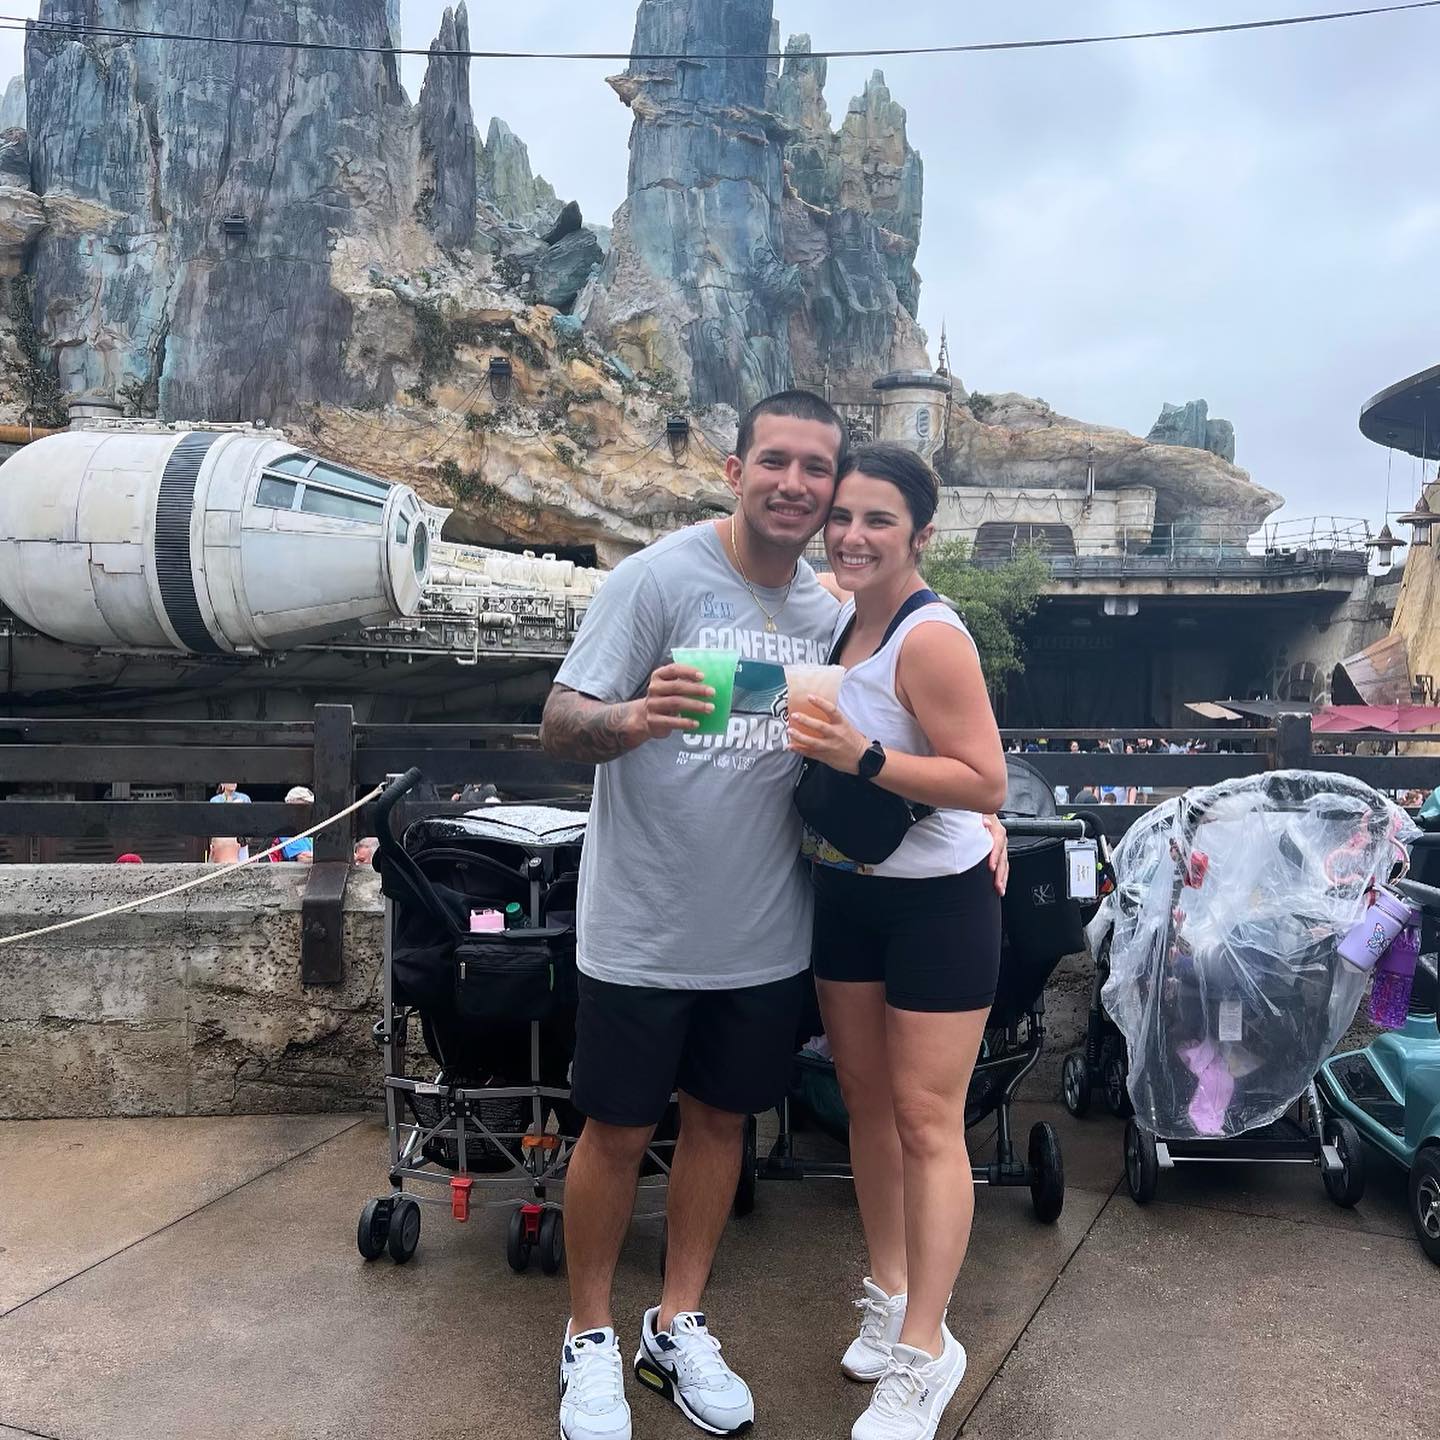 Lauren confirmed she and Javi had to share the pregnancy news early due to someone already leaking it